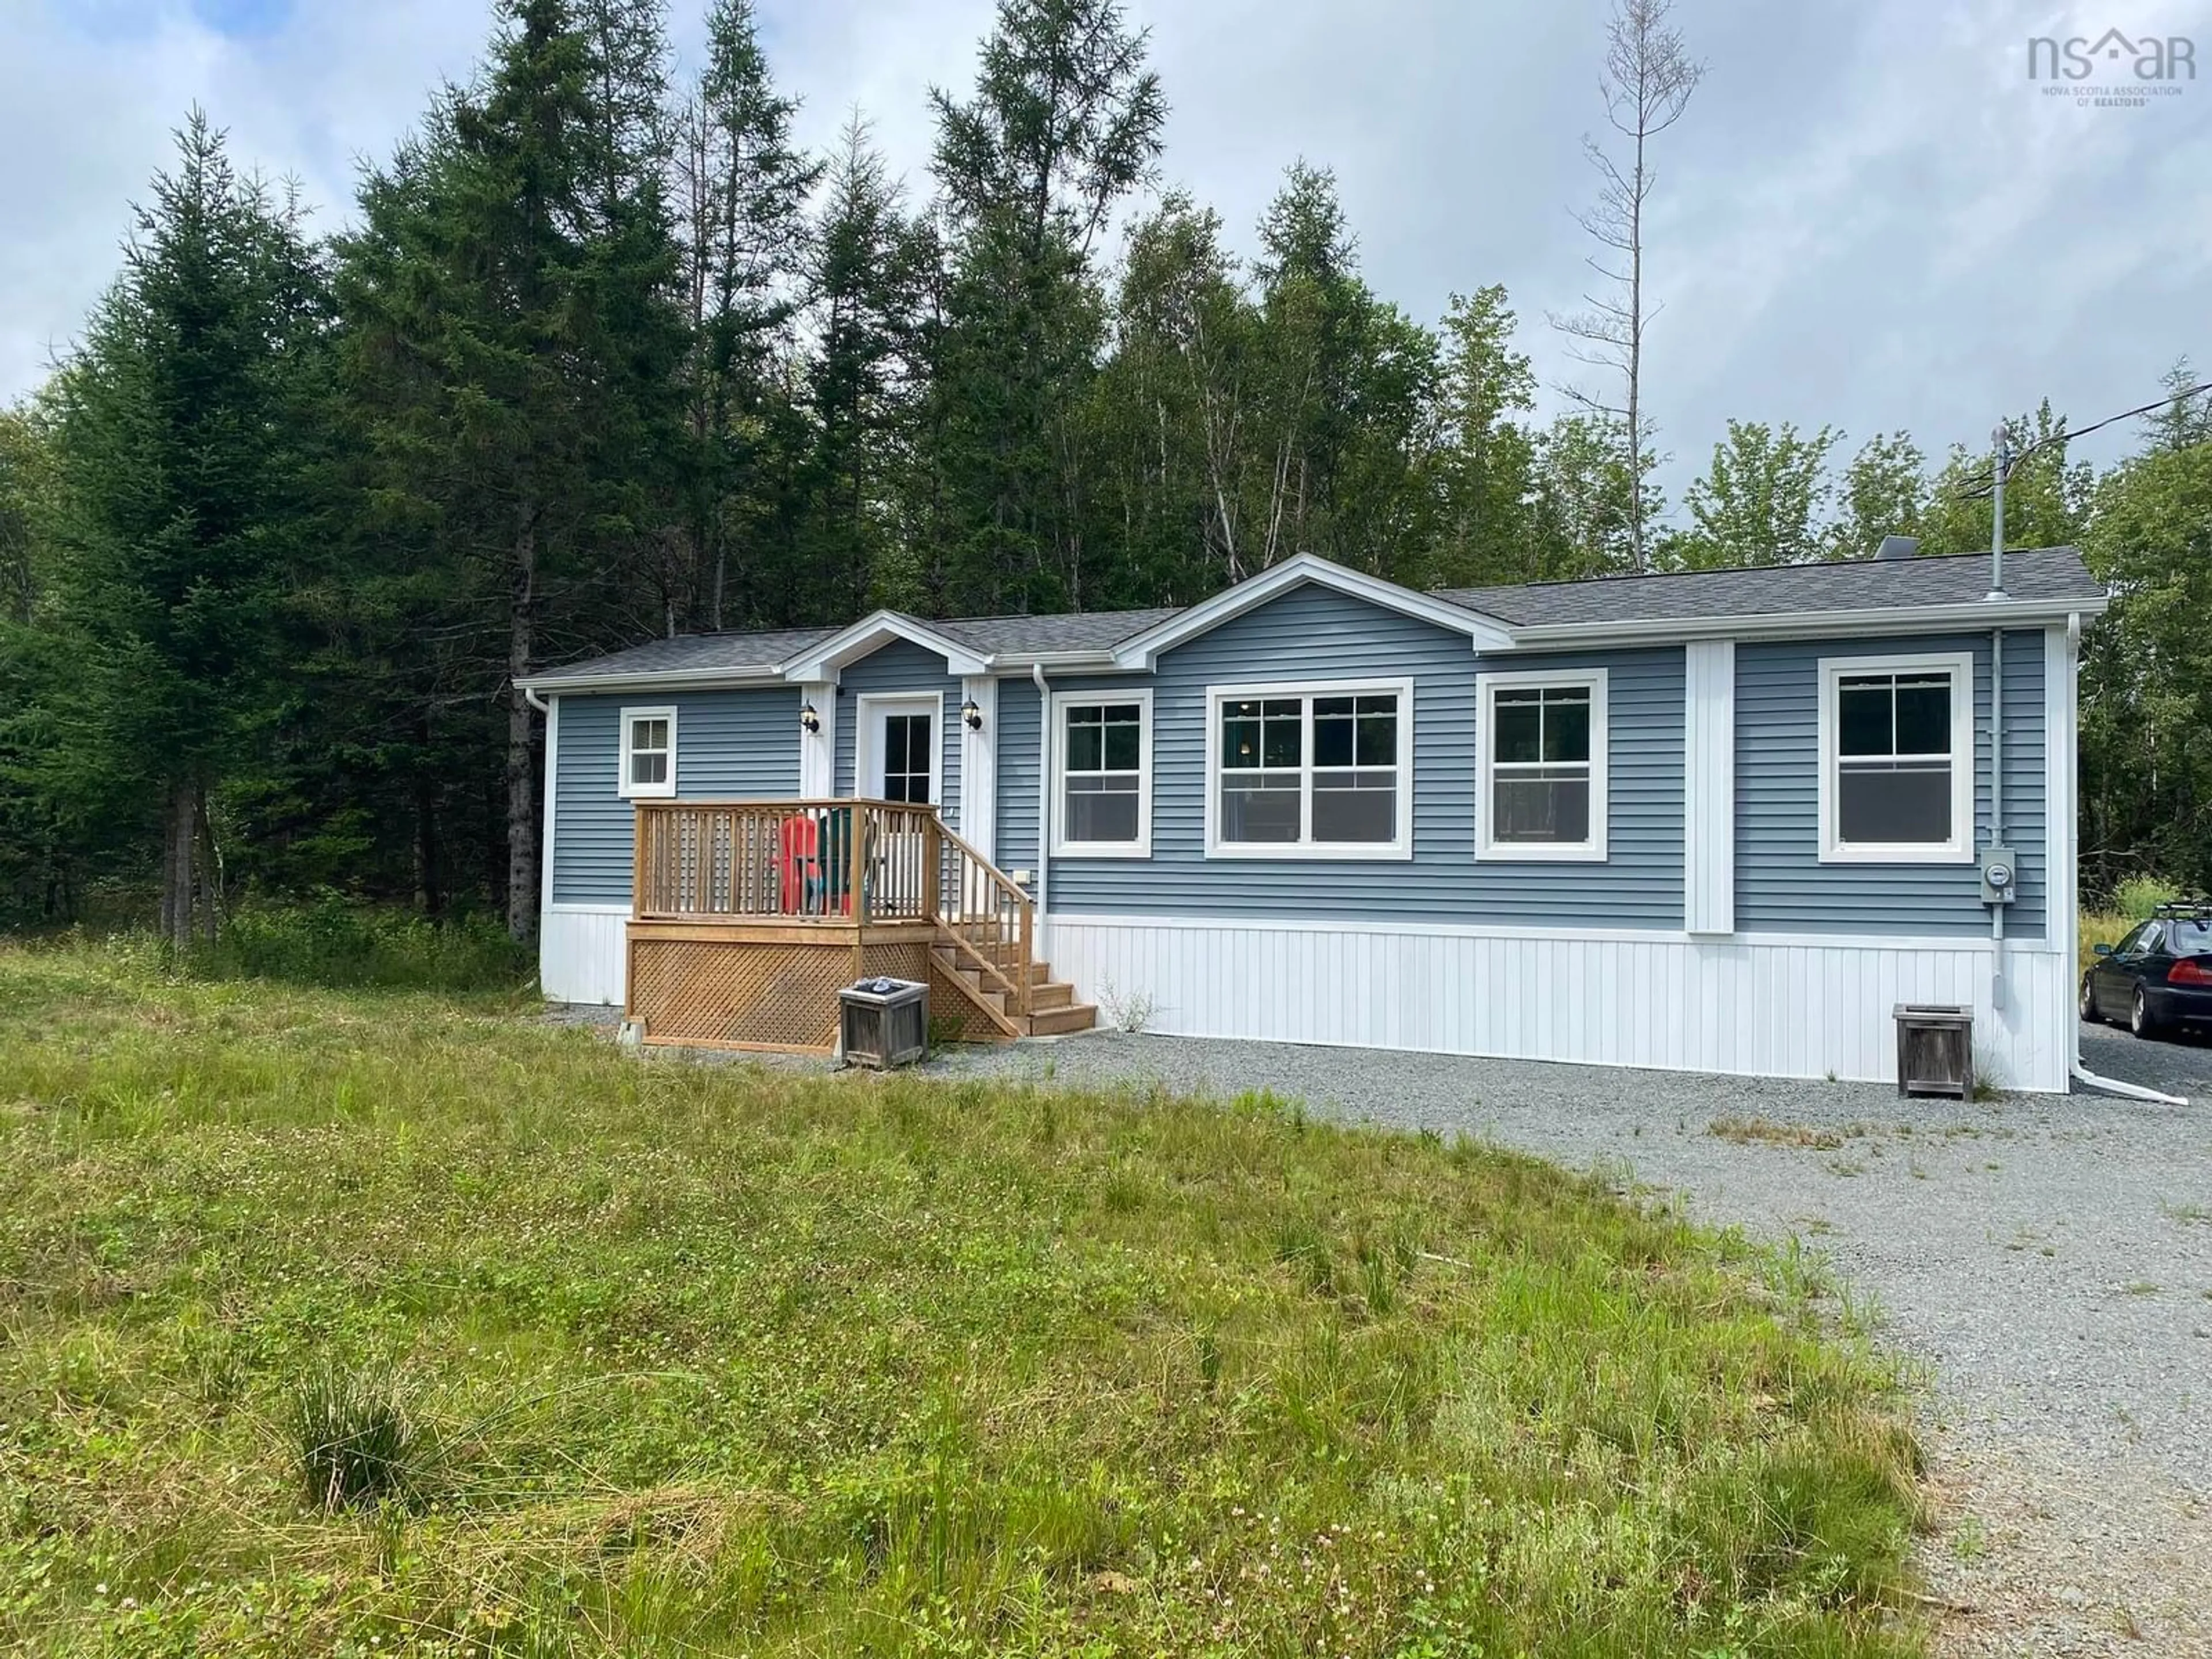 Cottage for 2261 Highway 289, Middle Stewiacke Nova Scotia B0N 1C0